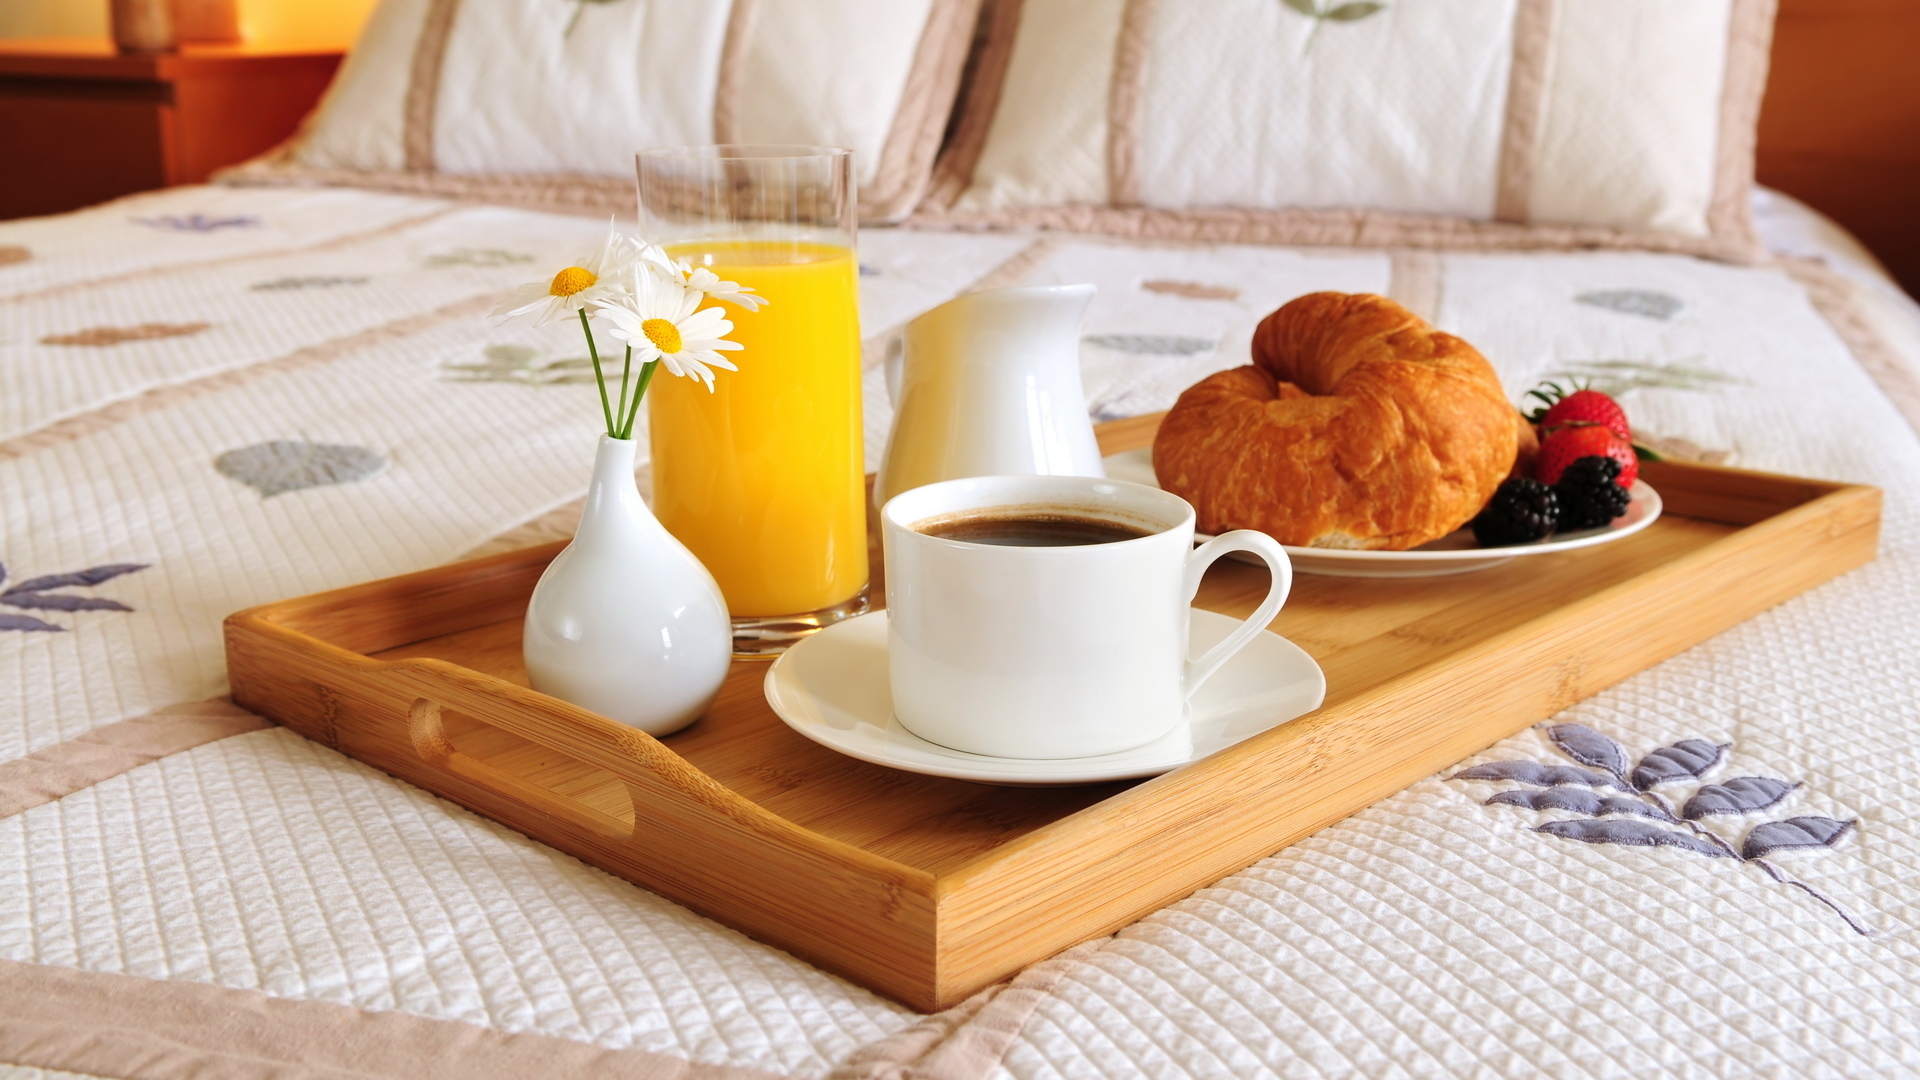 daisy, food, breakfast, coffee, croissant, cup, juice, still life wallpapers for tablet